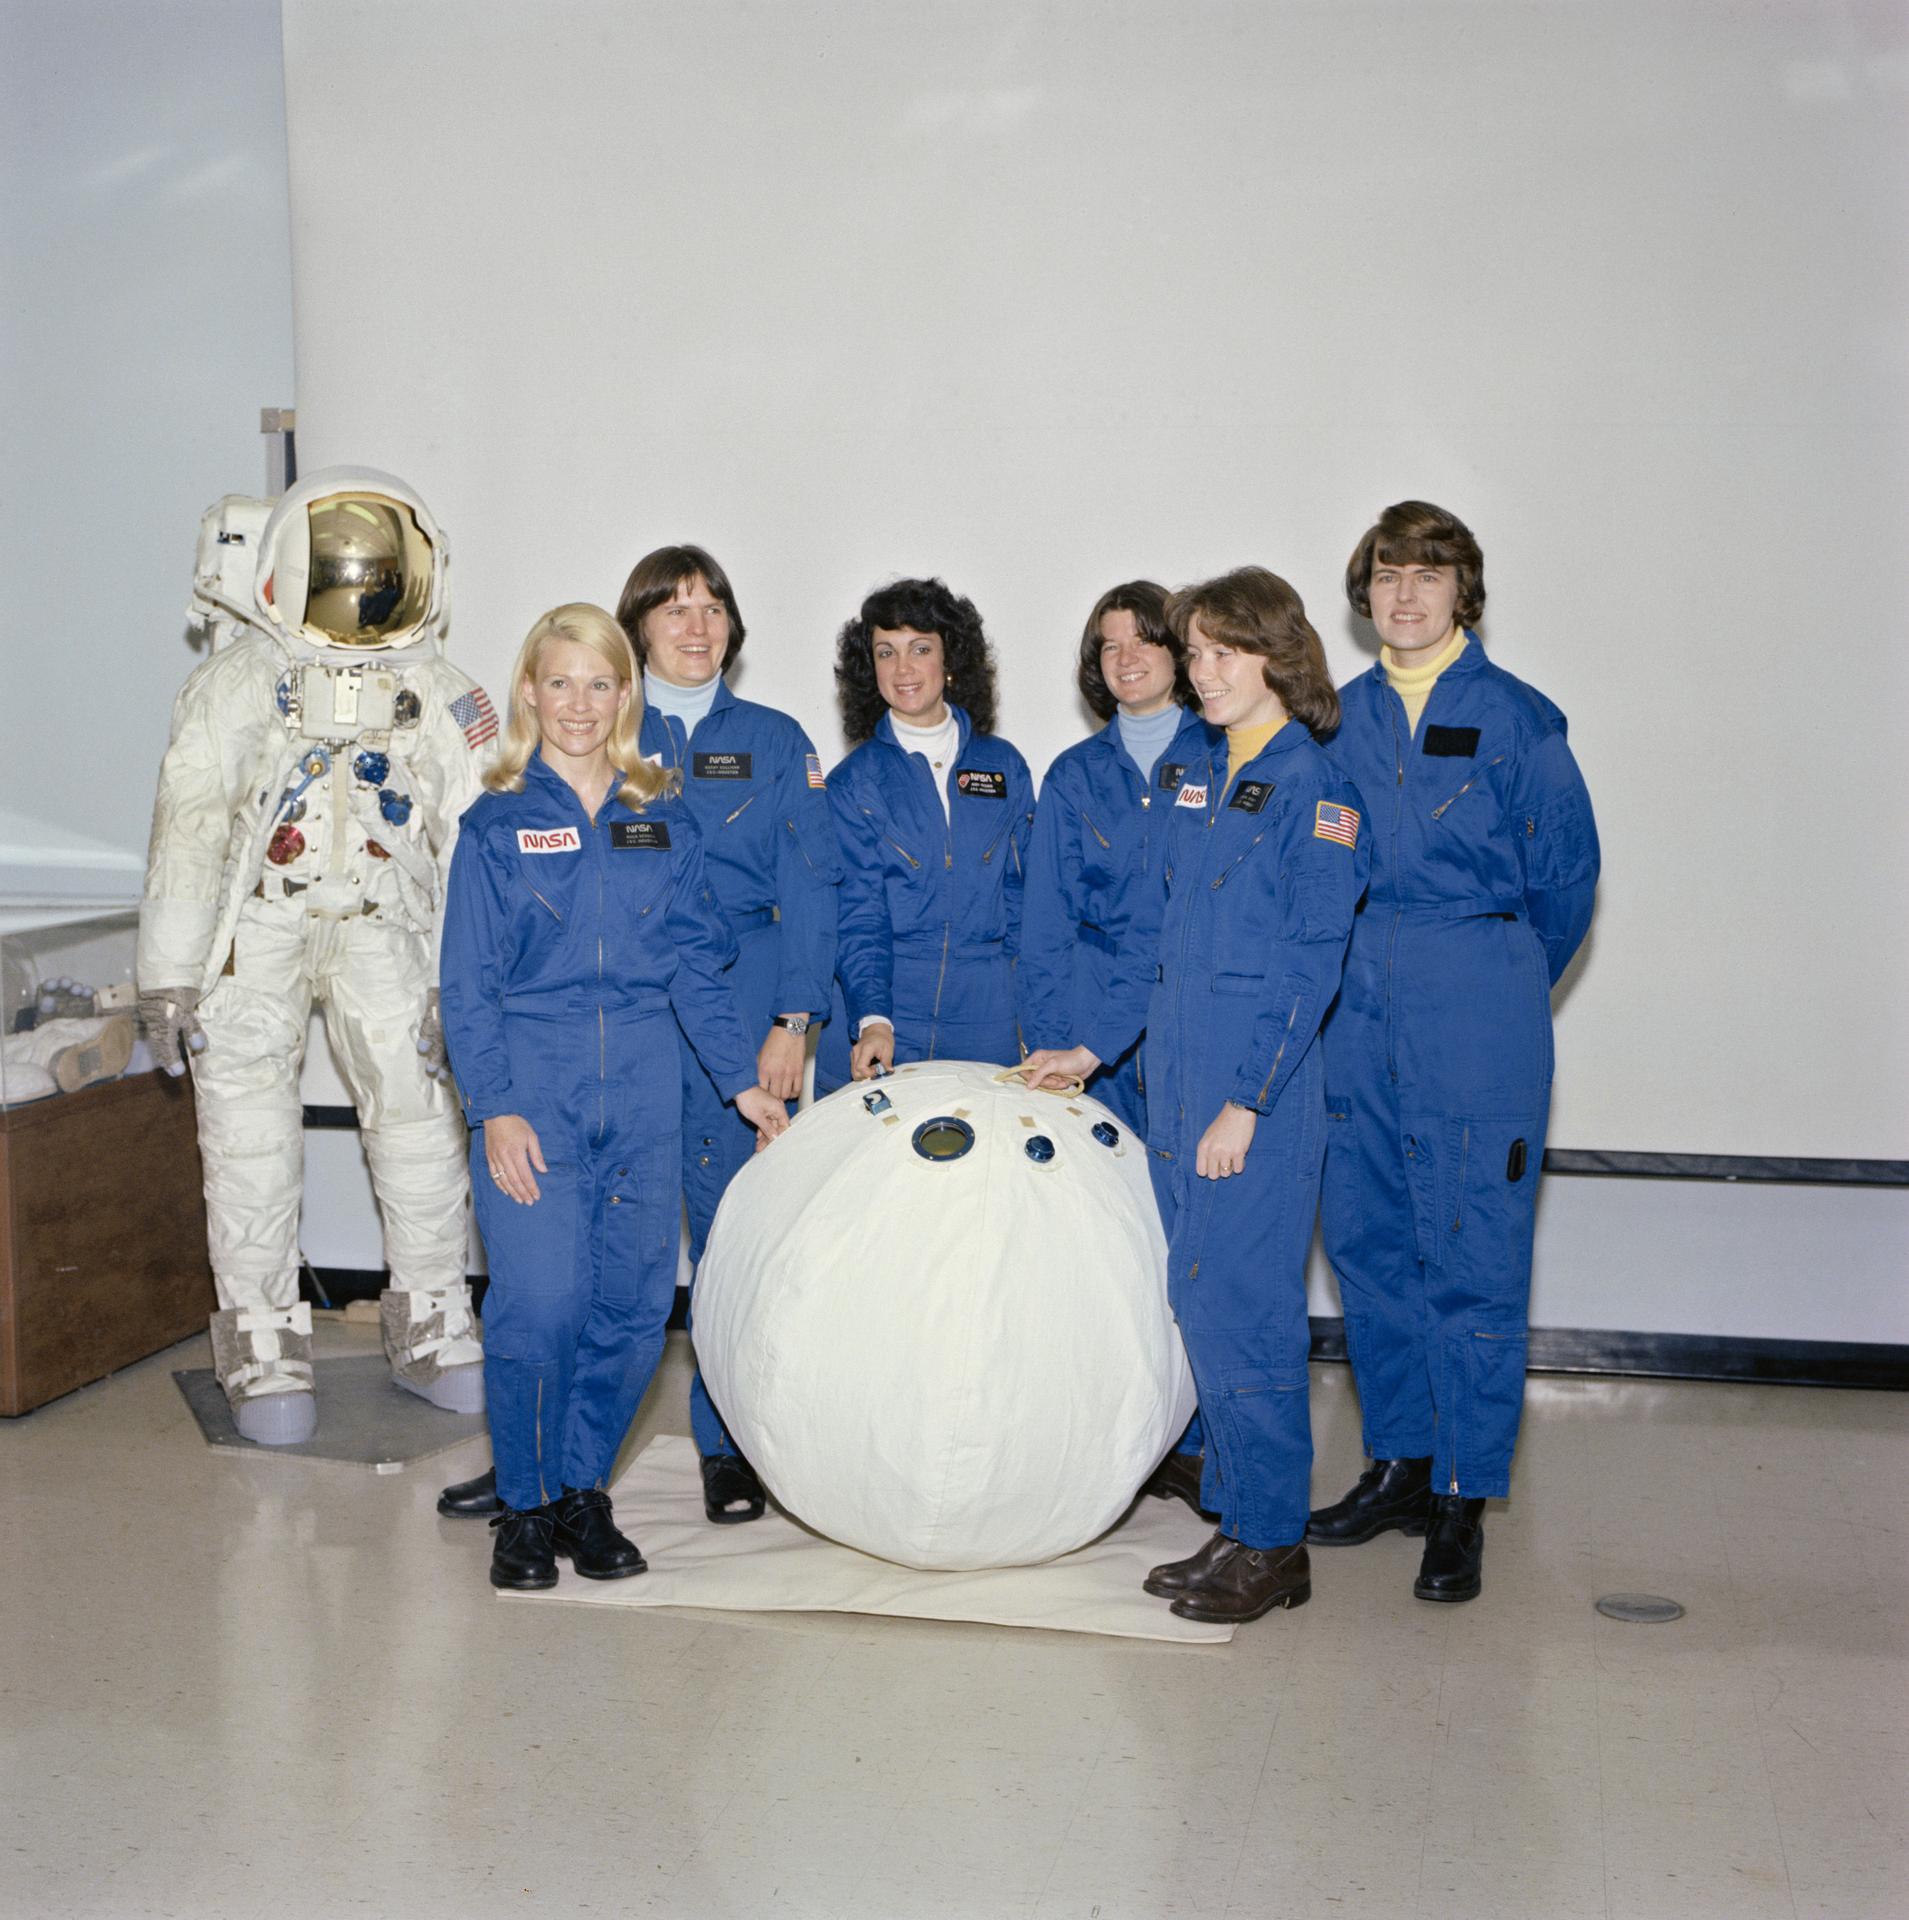 Photograph of Female Astronaut Candidates in 1979